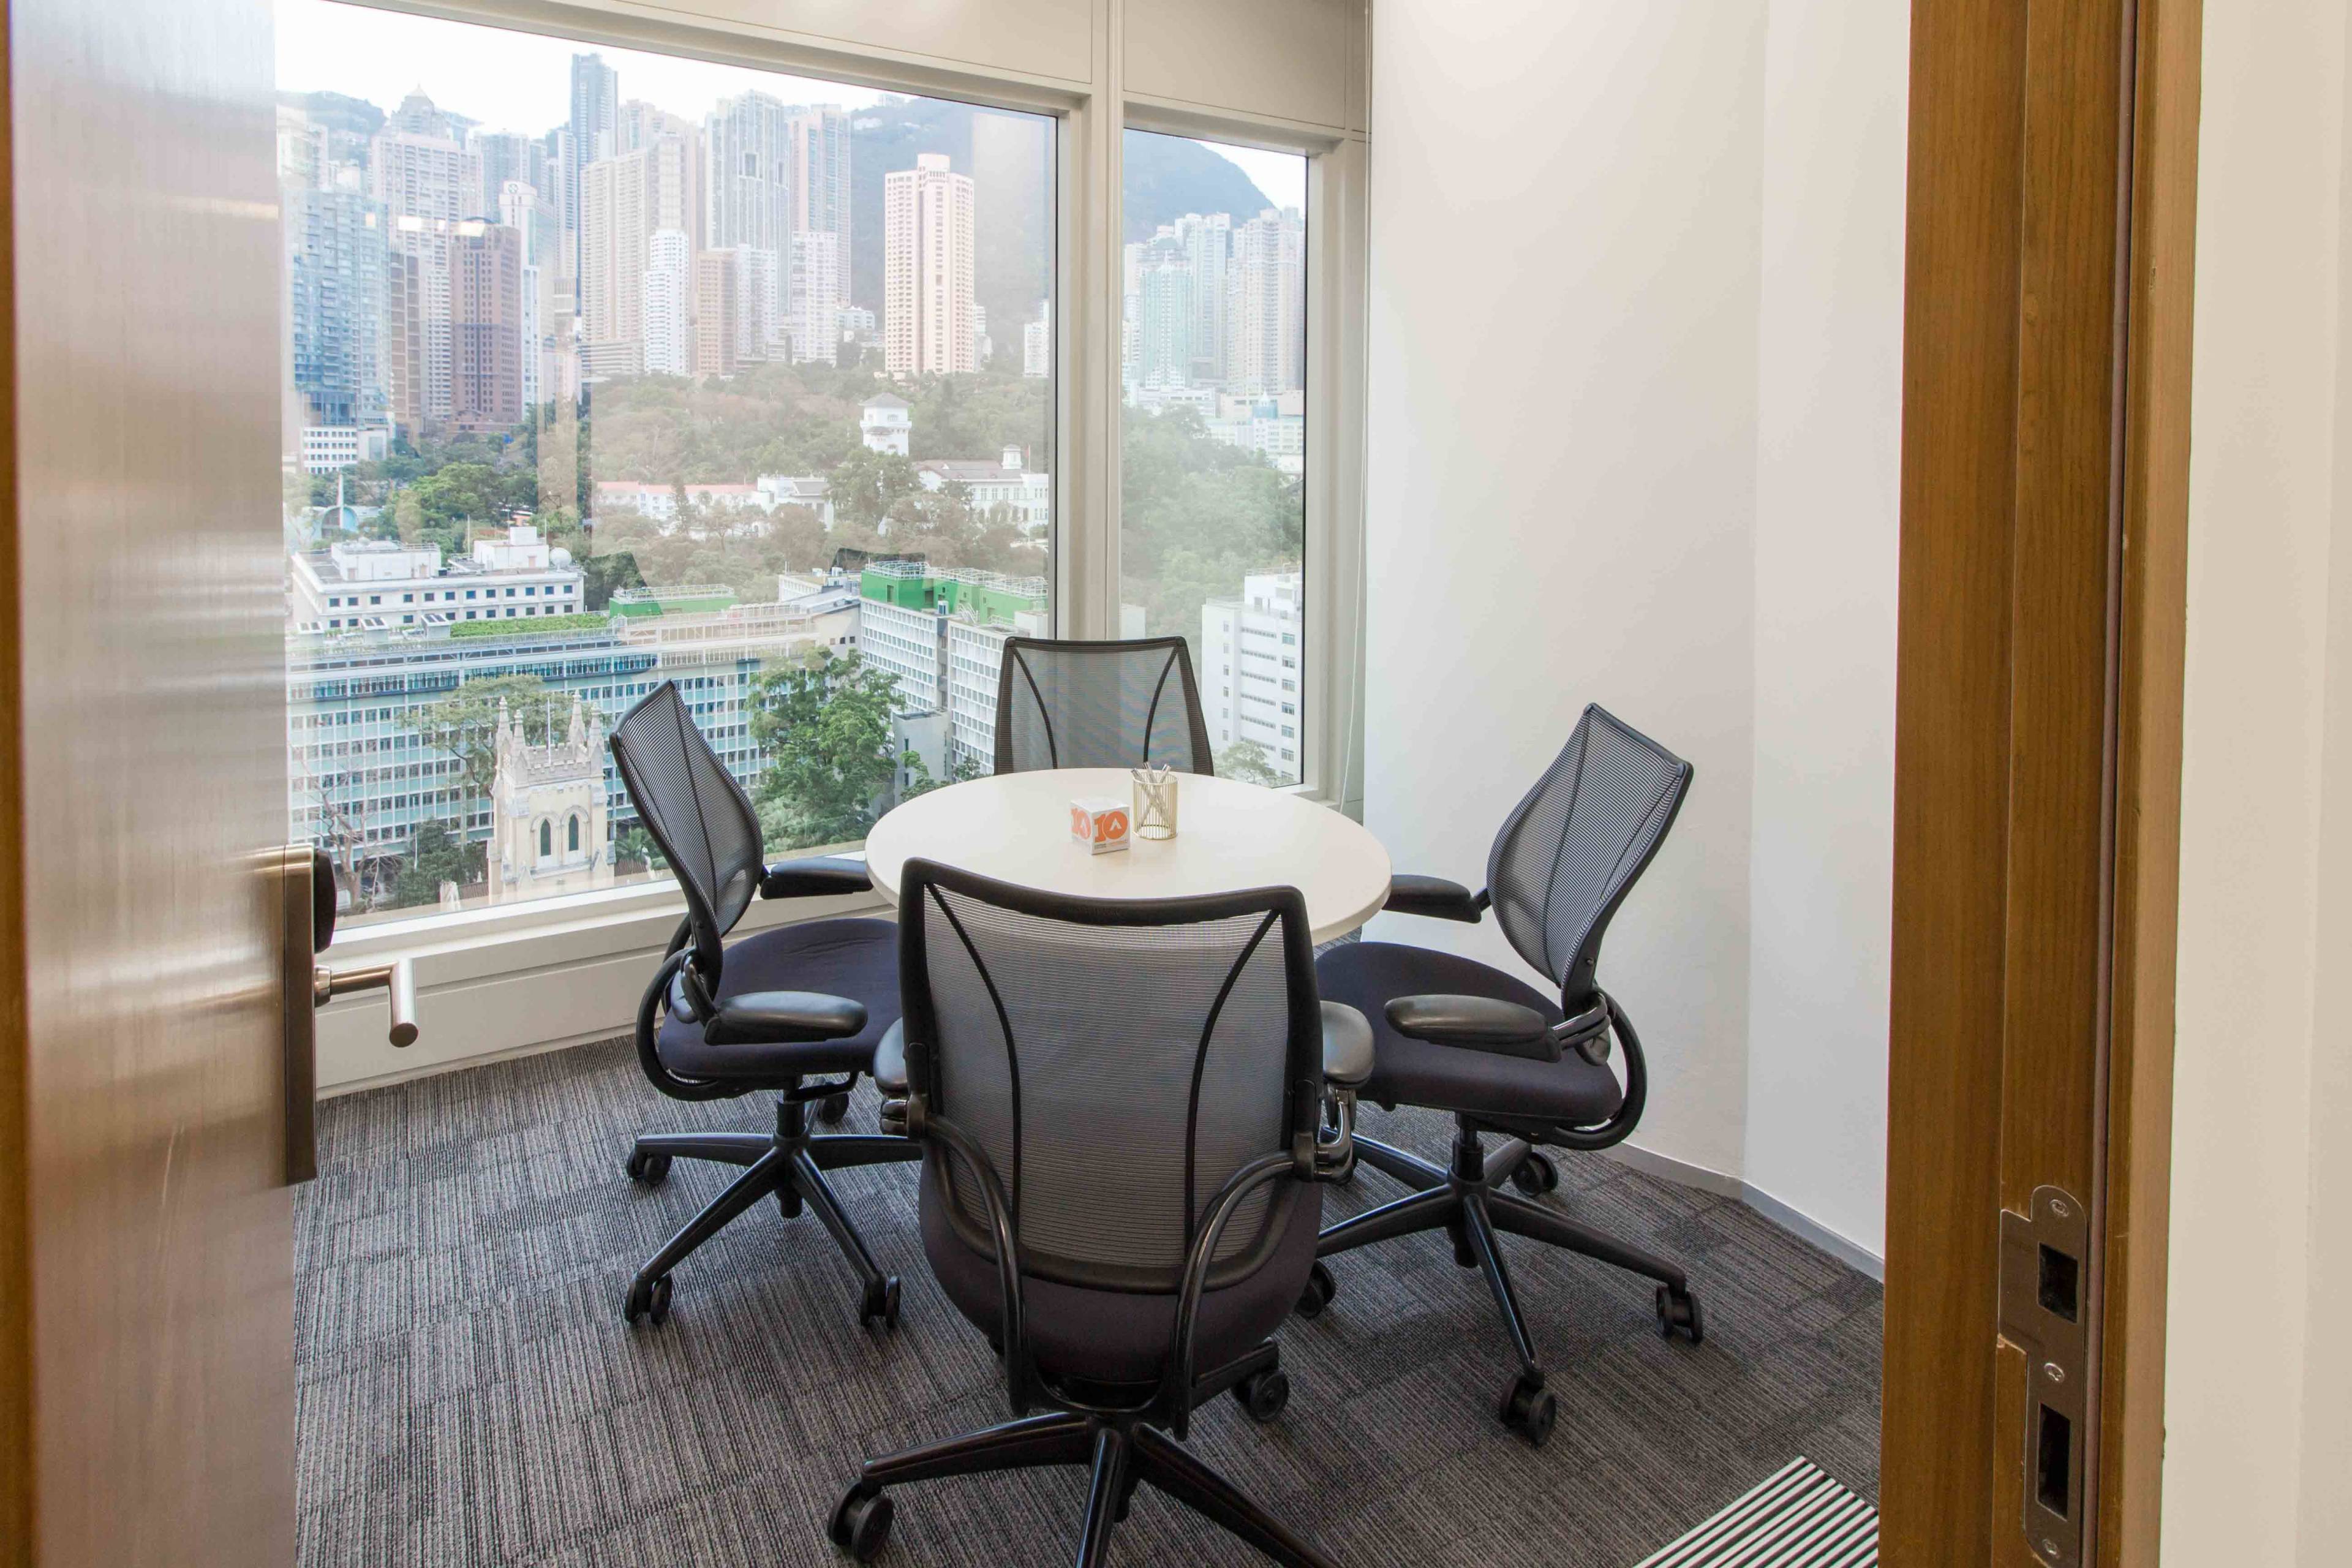 19/F, Cheung Kong Center, 2 Queen's Road Central